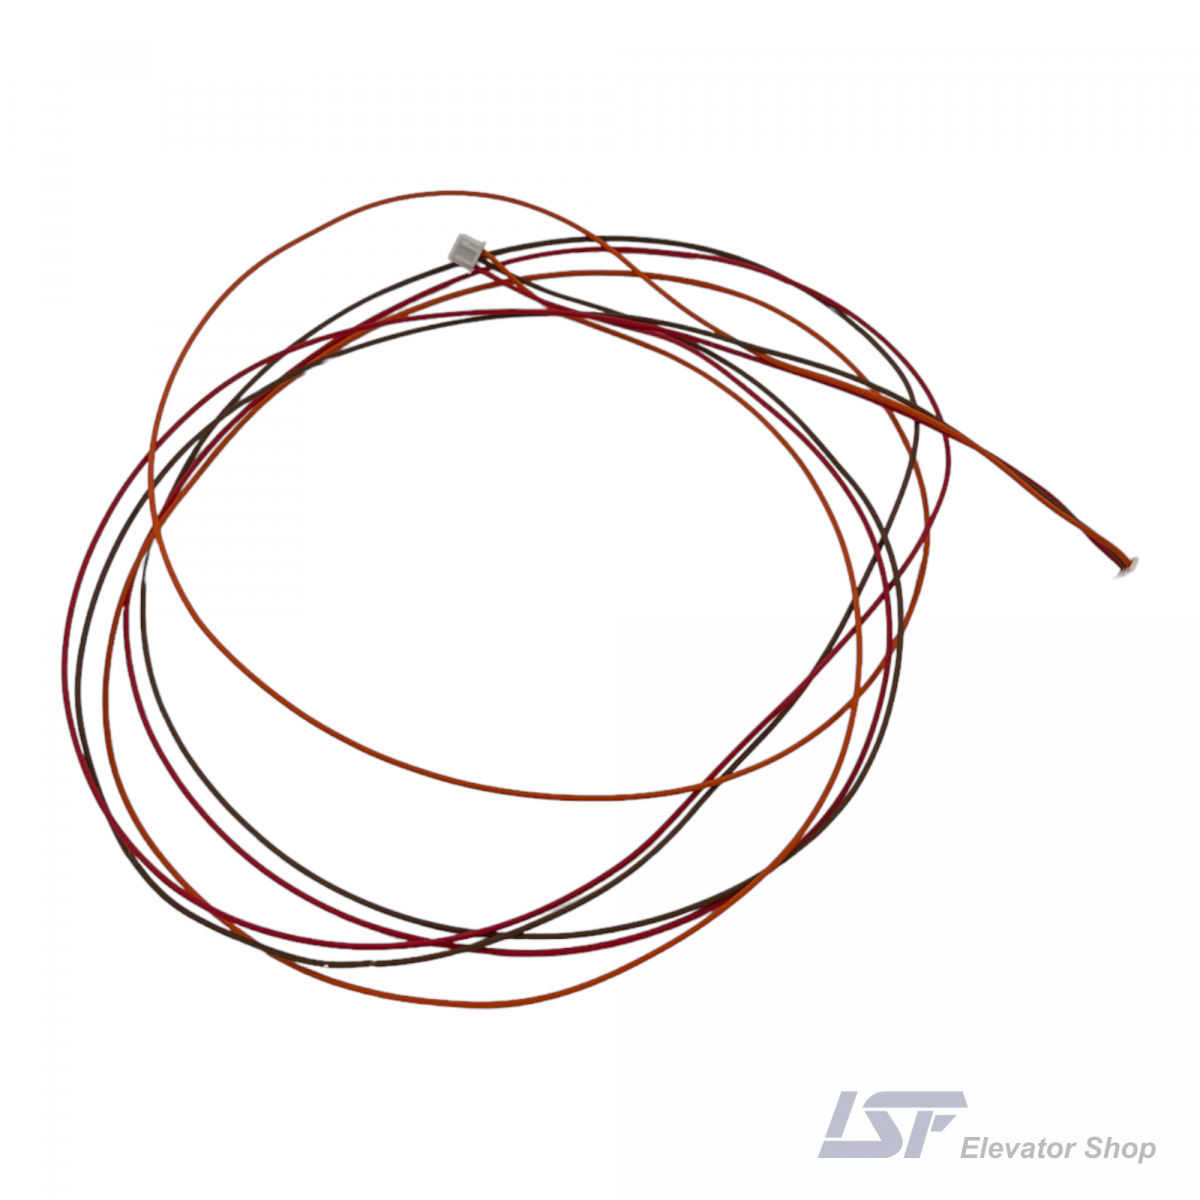 Arkel KBL-BT4 Button Cable 150cm (Two End With Female Connectors) (2)